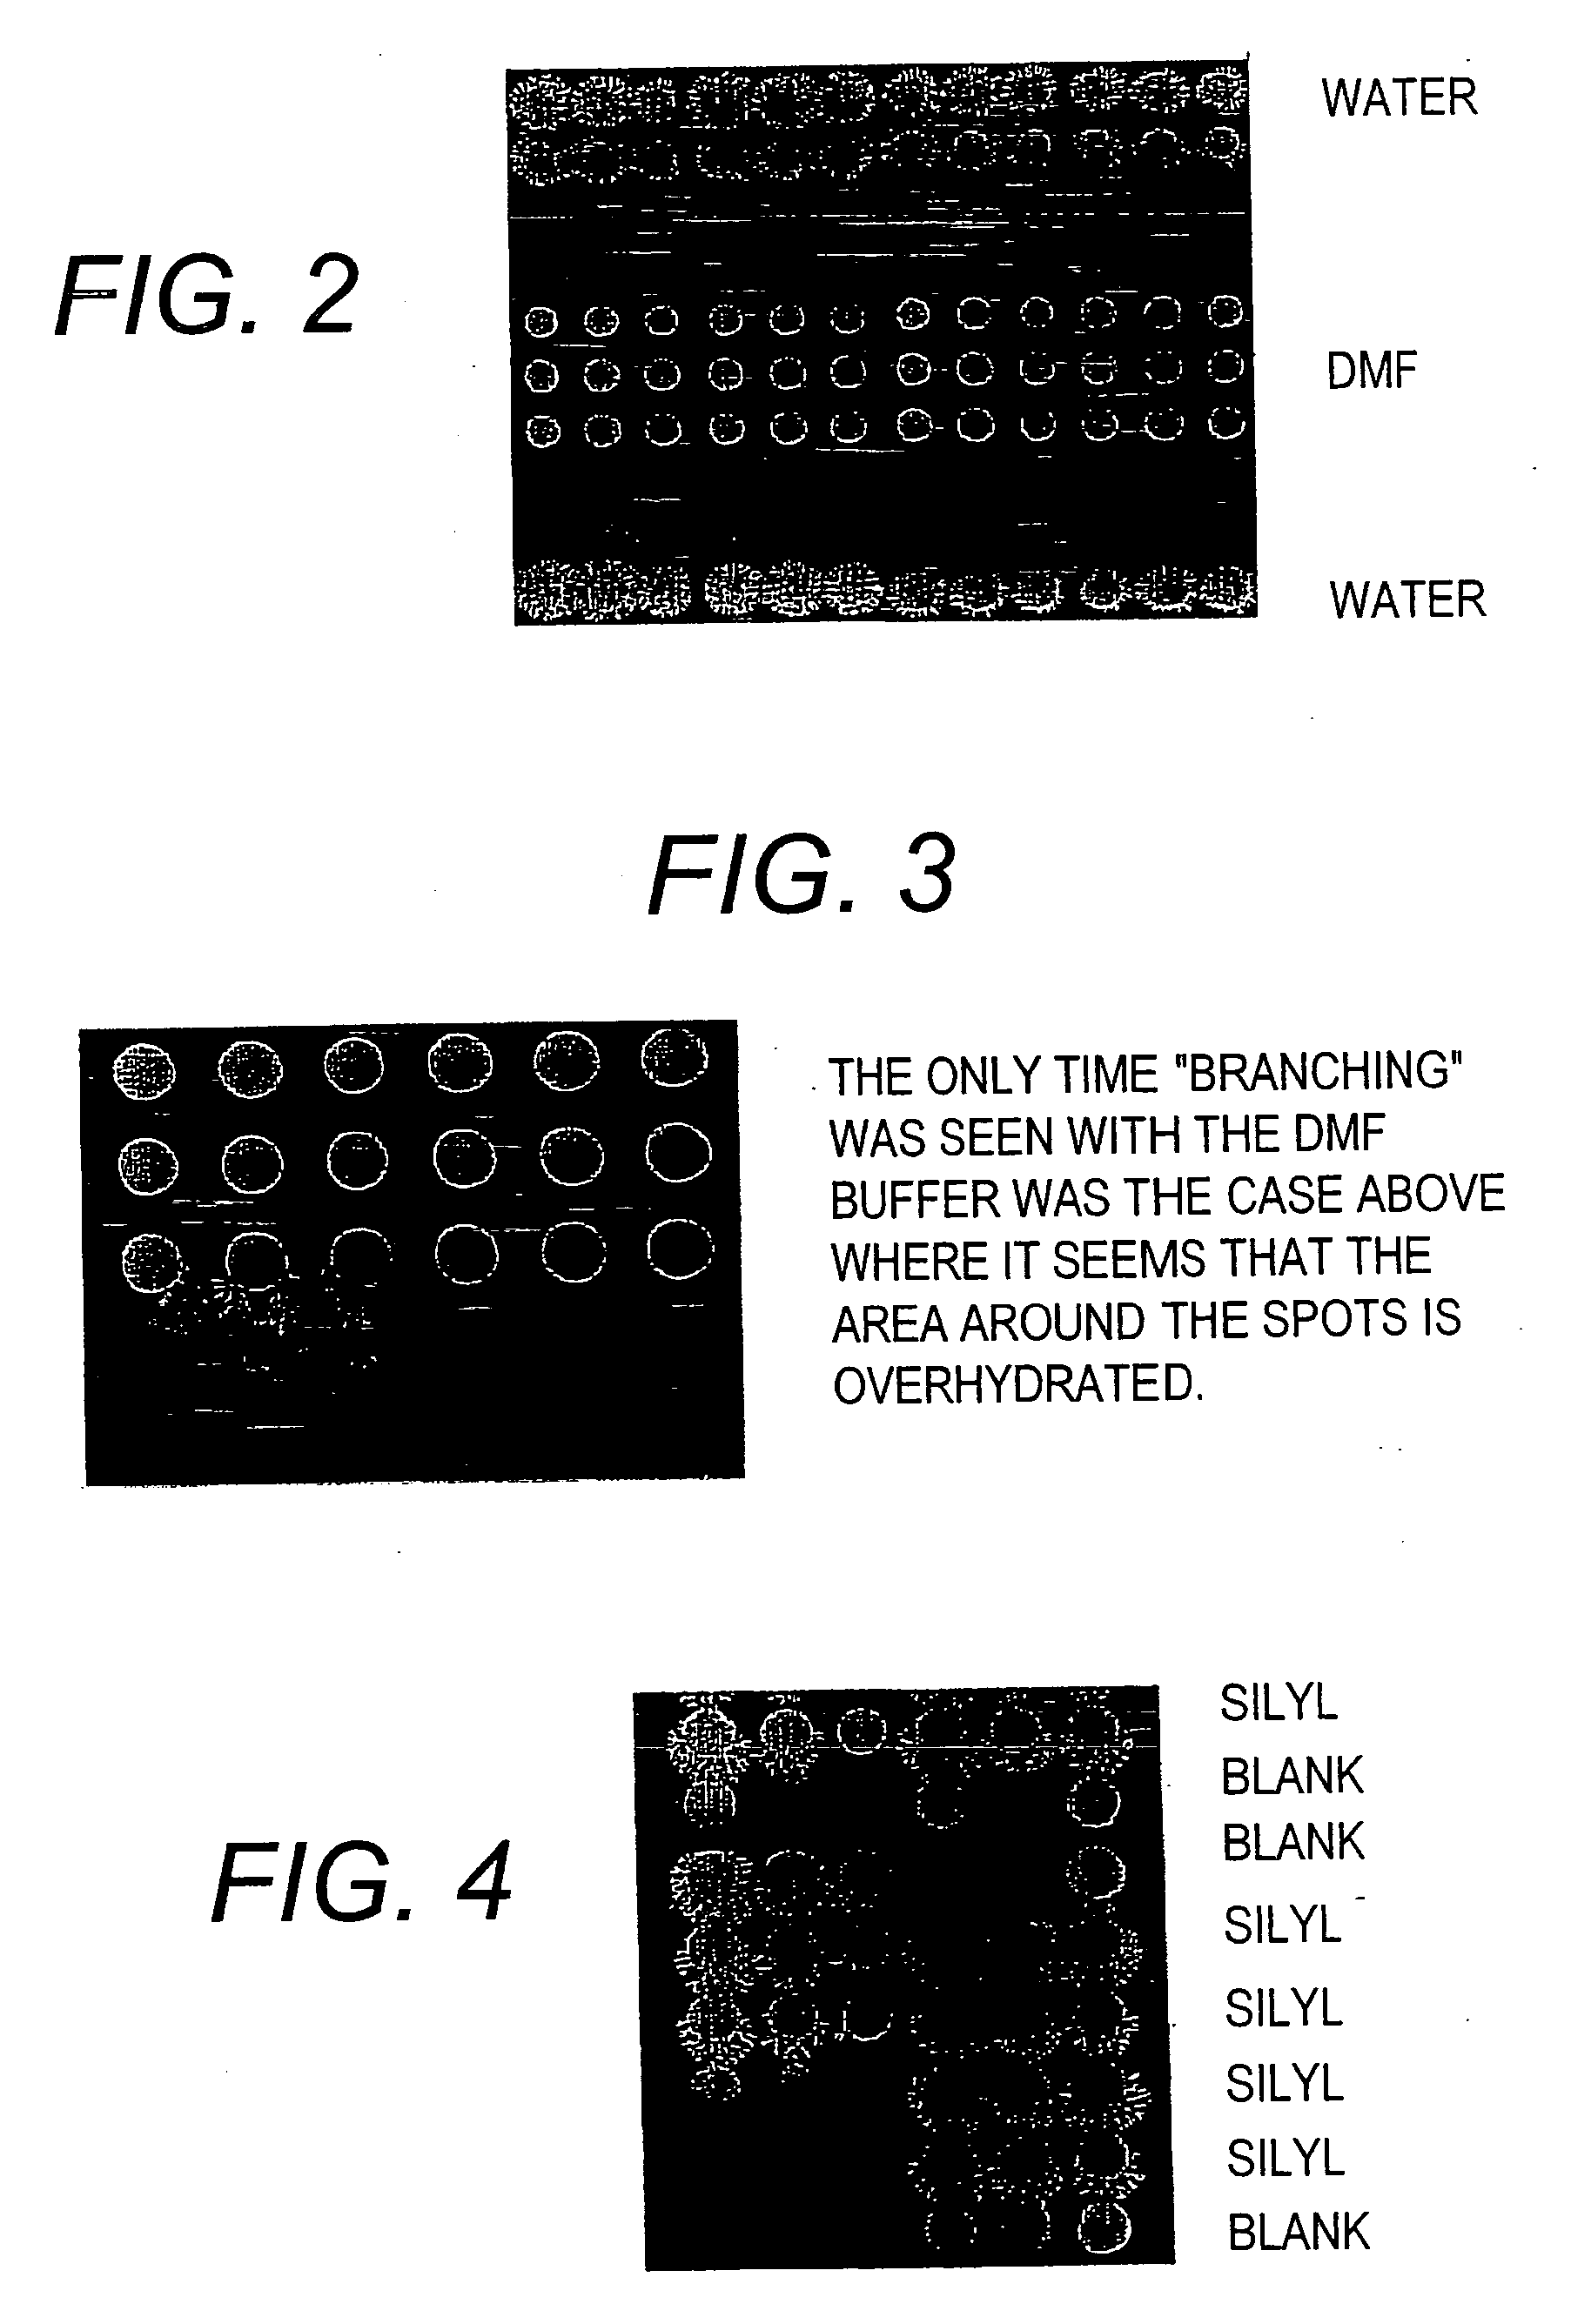 Method for attachment of silylated molecules to glass surfaces